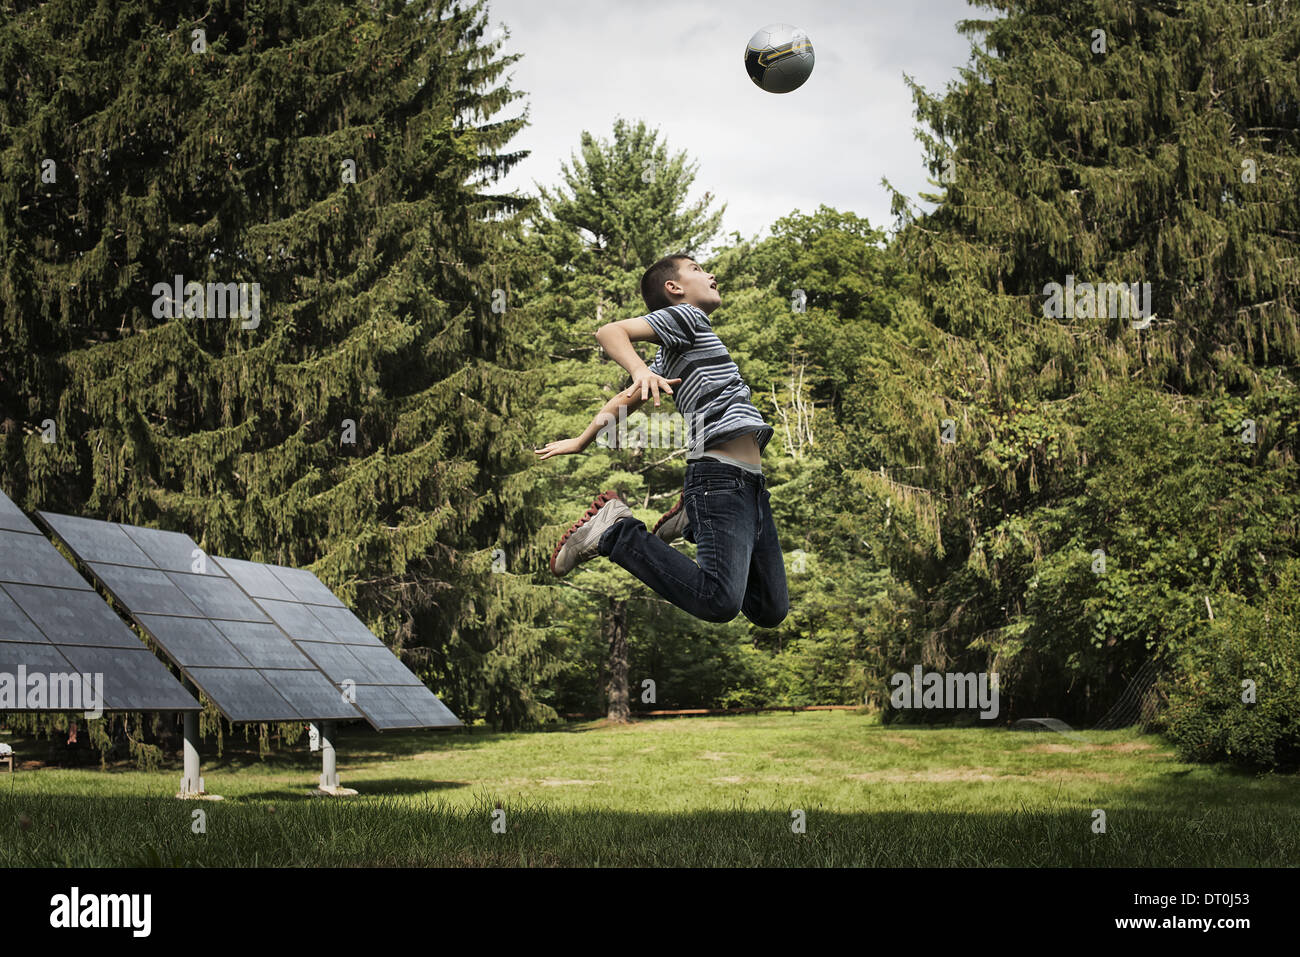 Woodstock New York USA boy leaping to head ball in garden Stock Photo